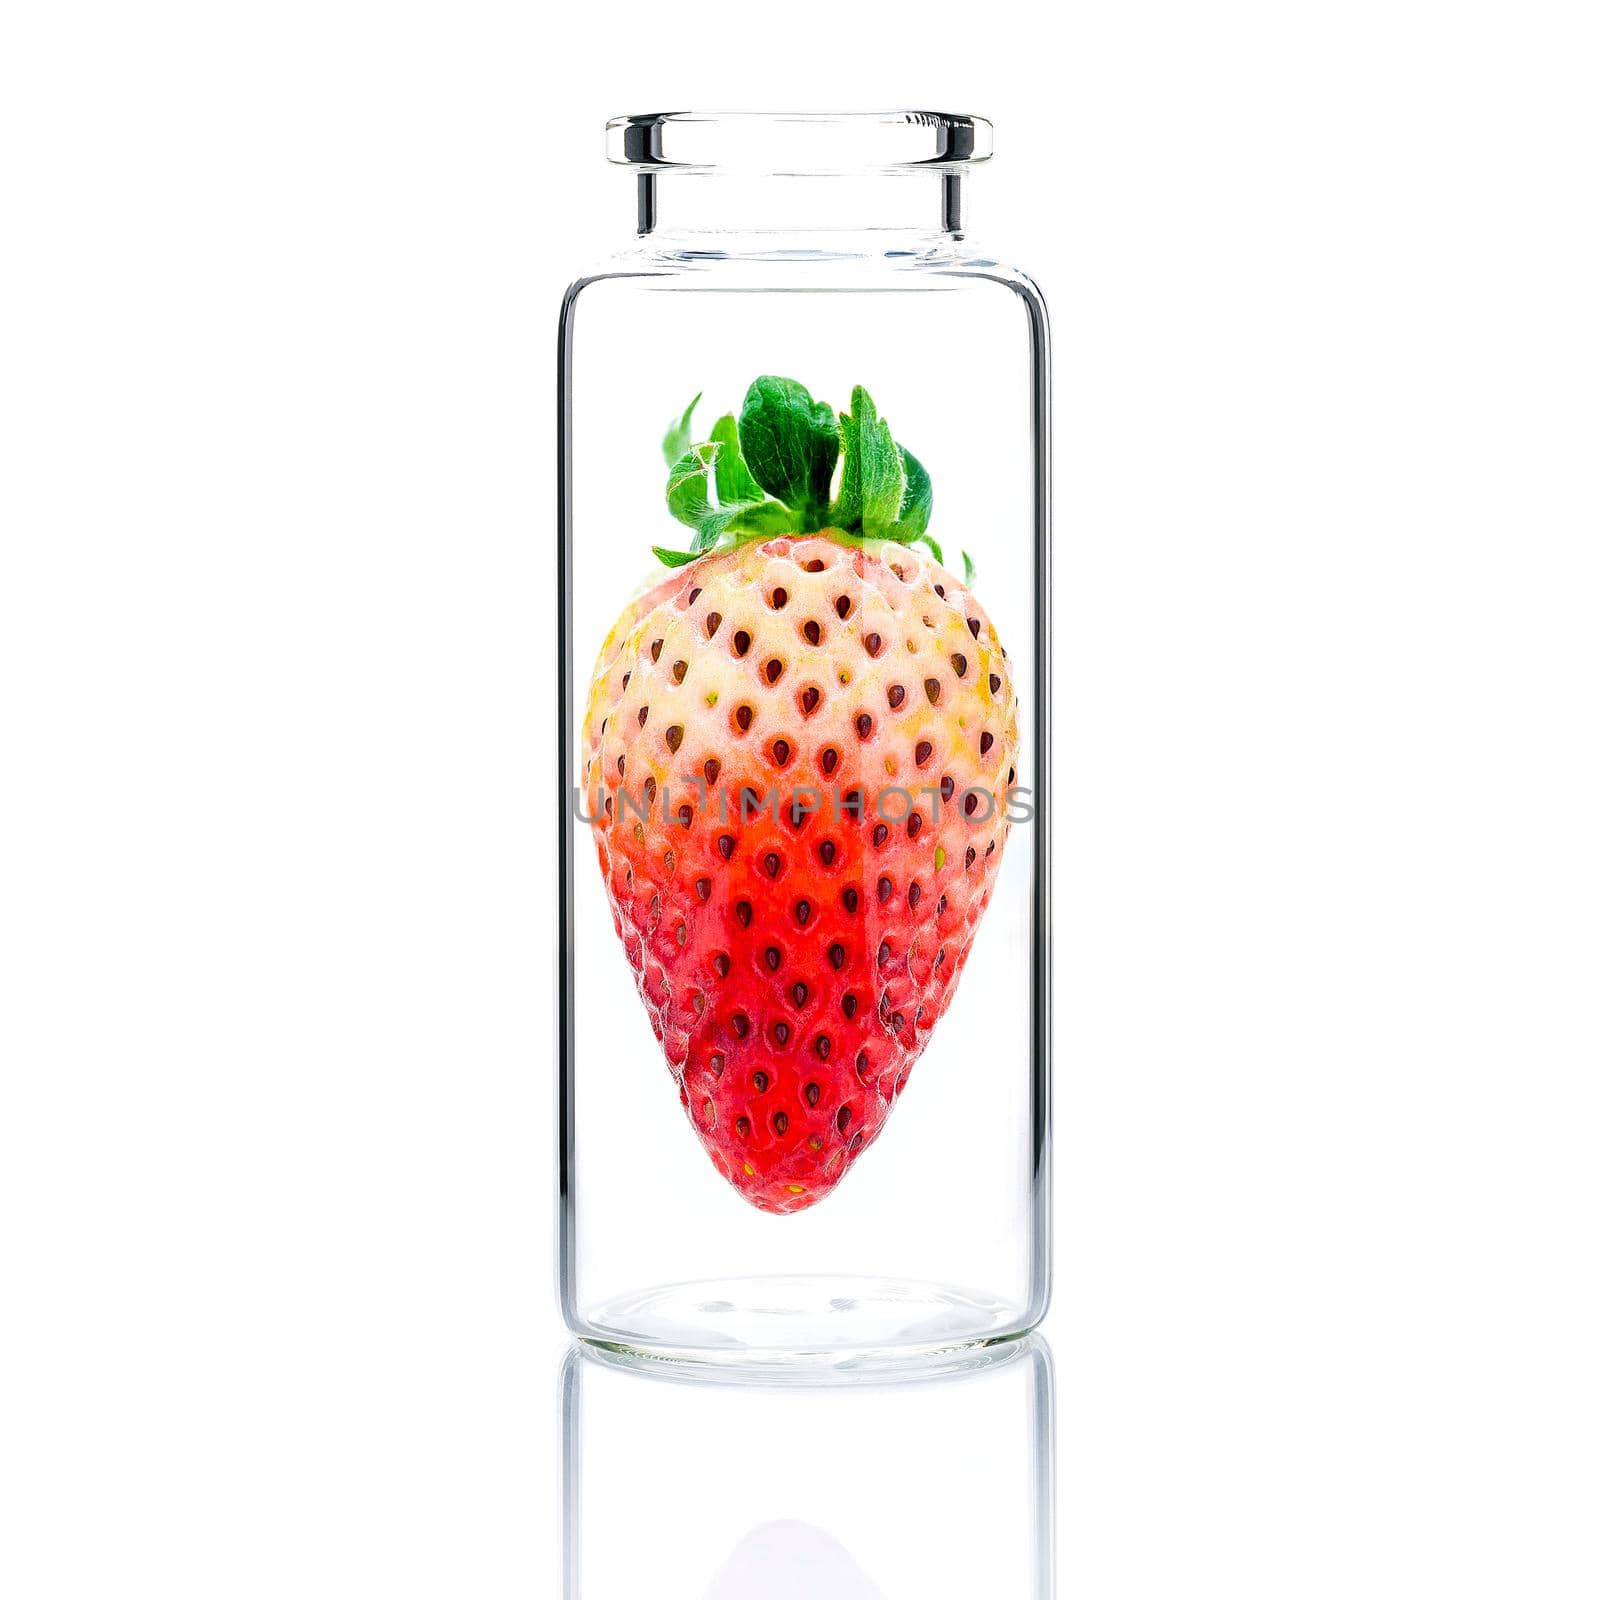 Homemade skin care with fresh strawberry in a glass bottle isolated on white background. by kerdkanno